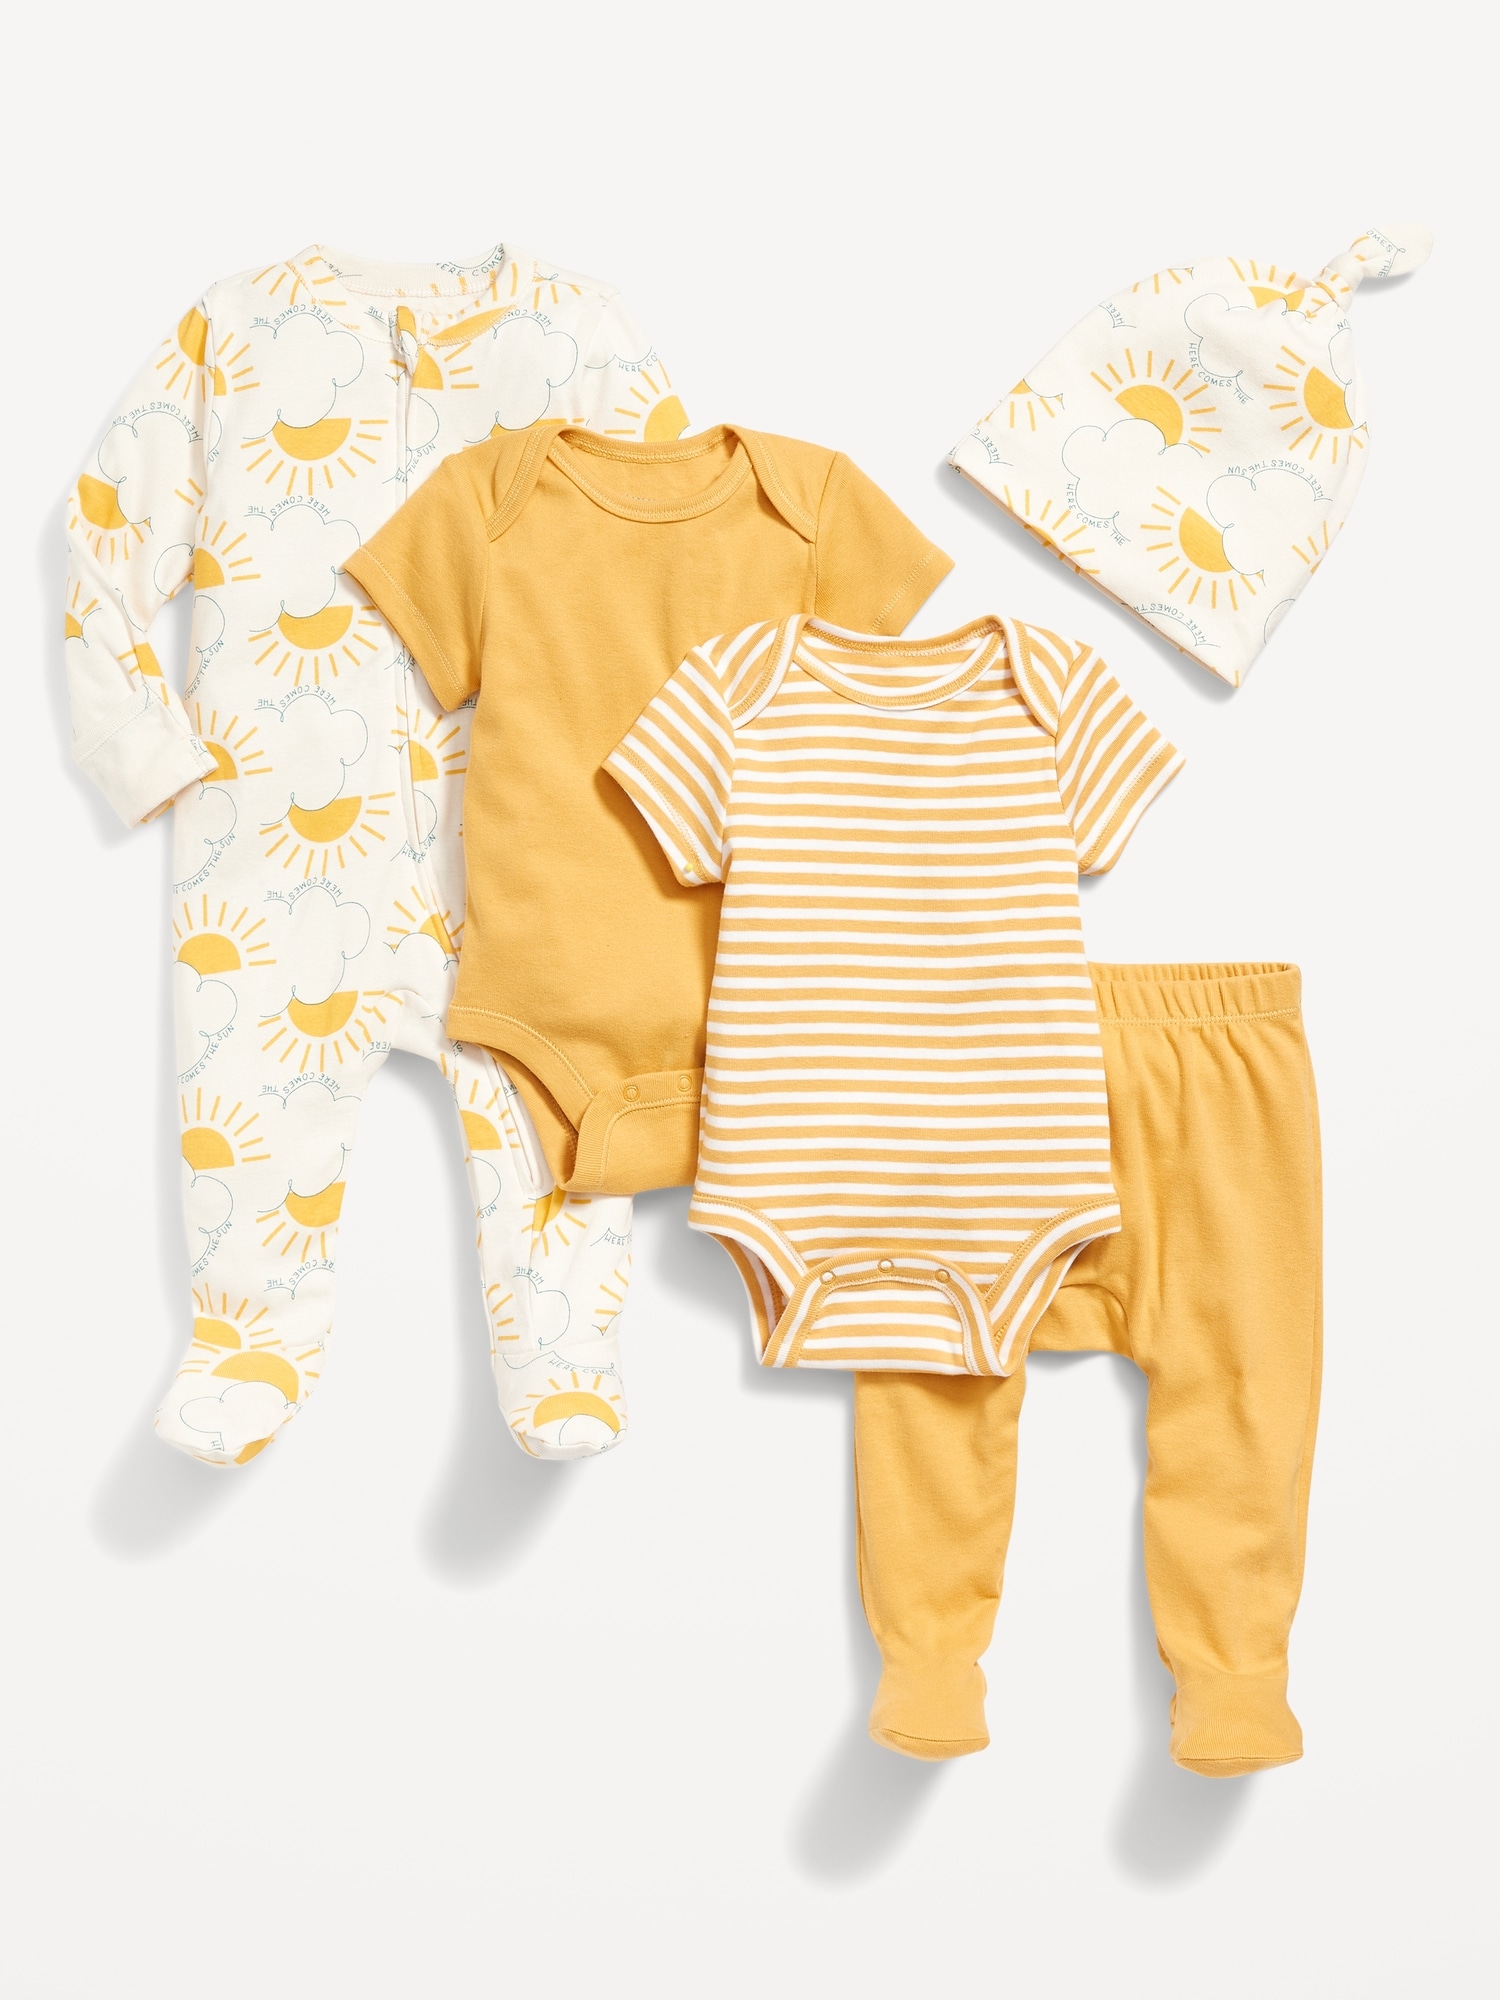 Old Navy Unisex Soft-Knit 5-Piece Layette Set for Baby multi. 1